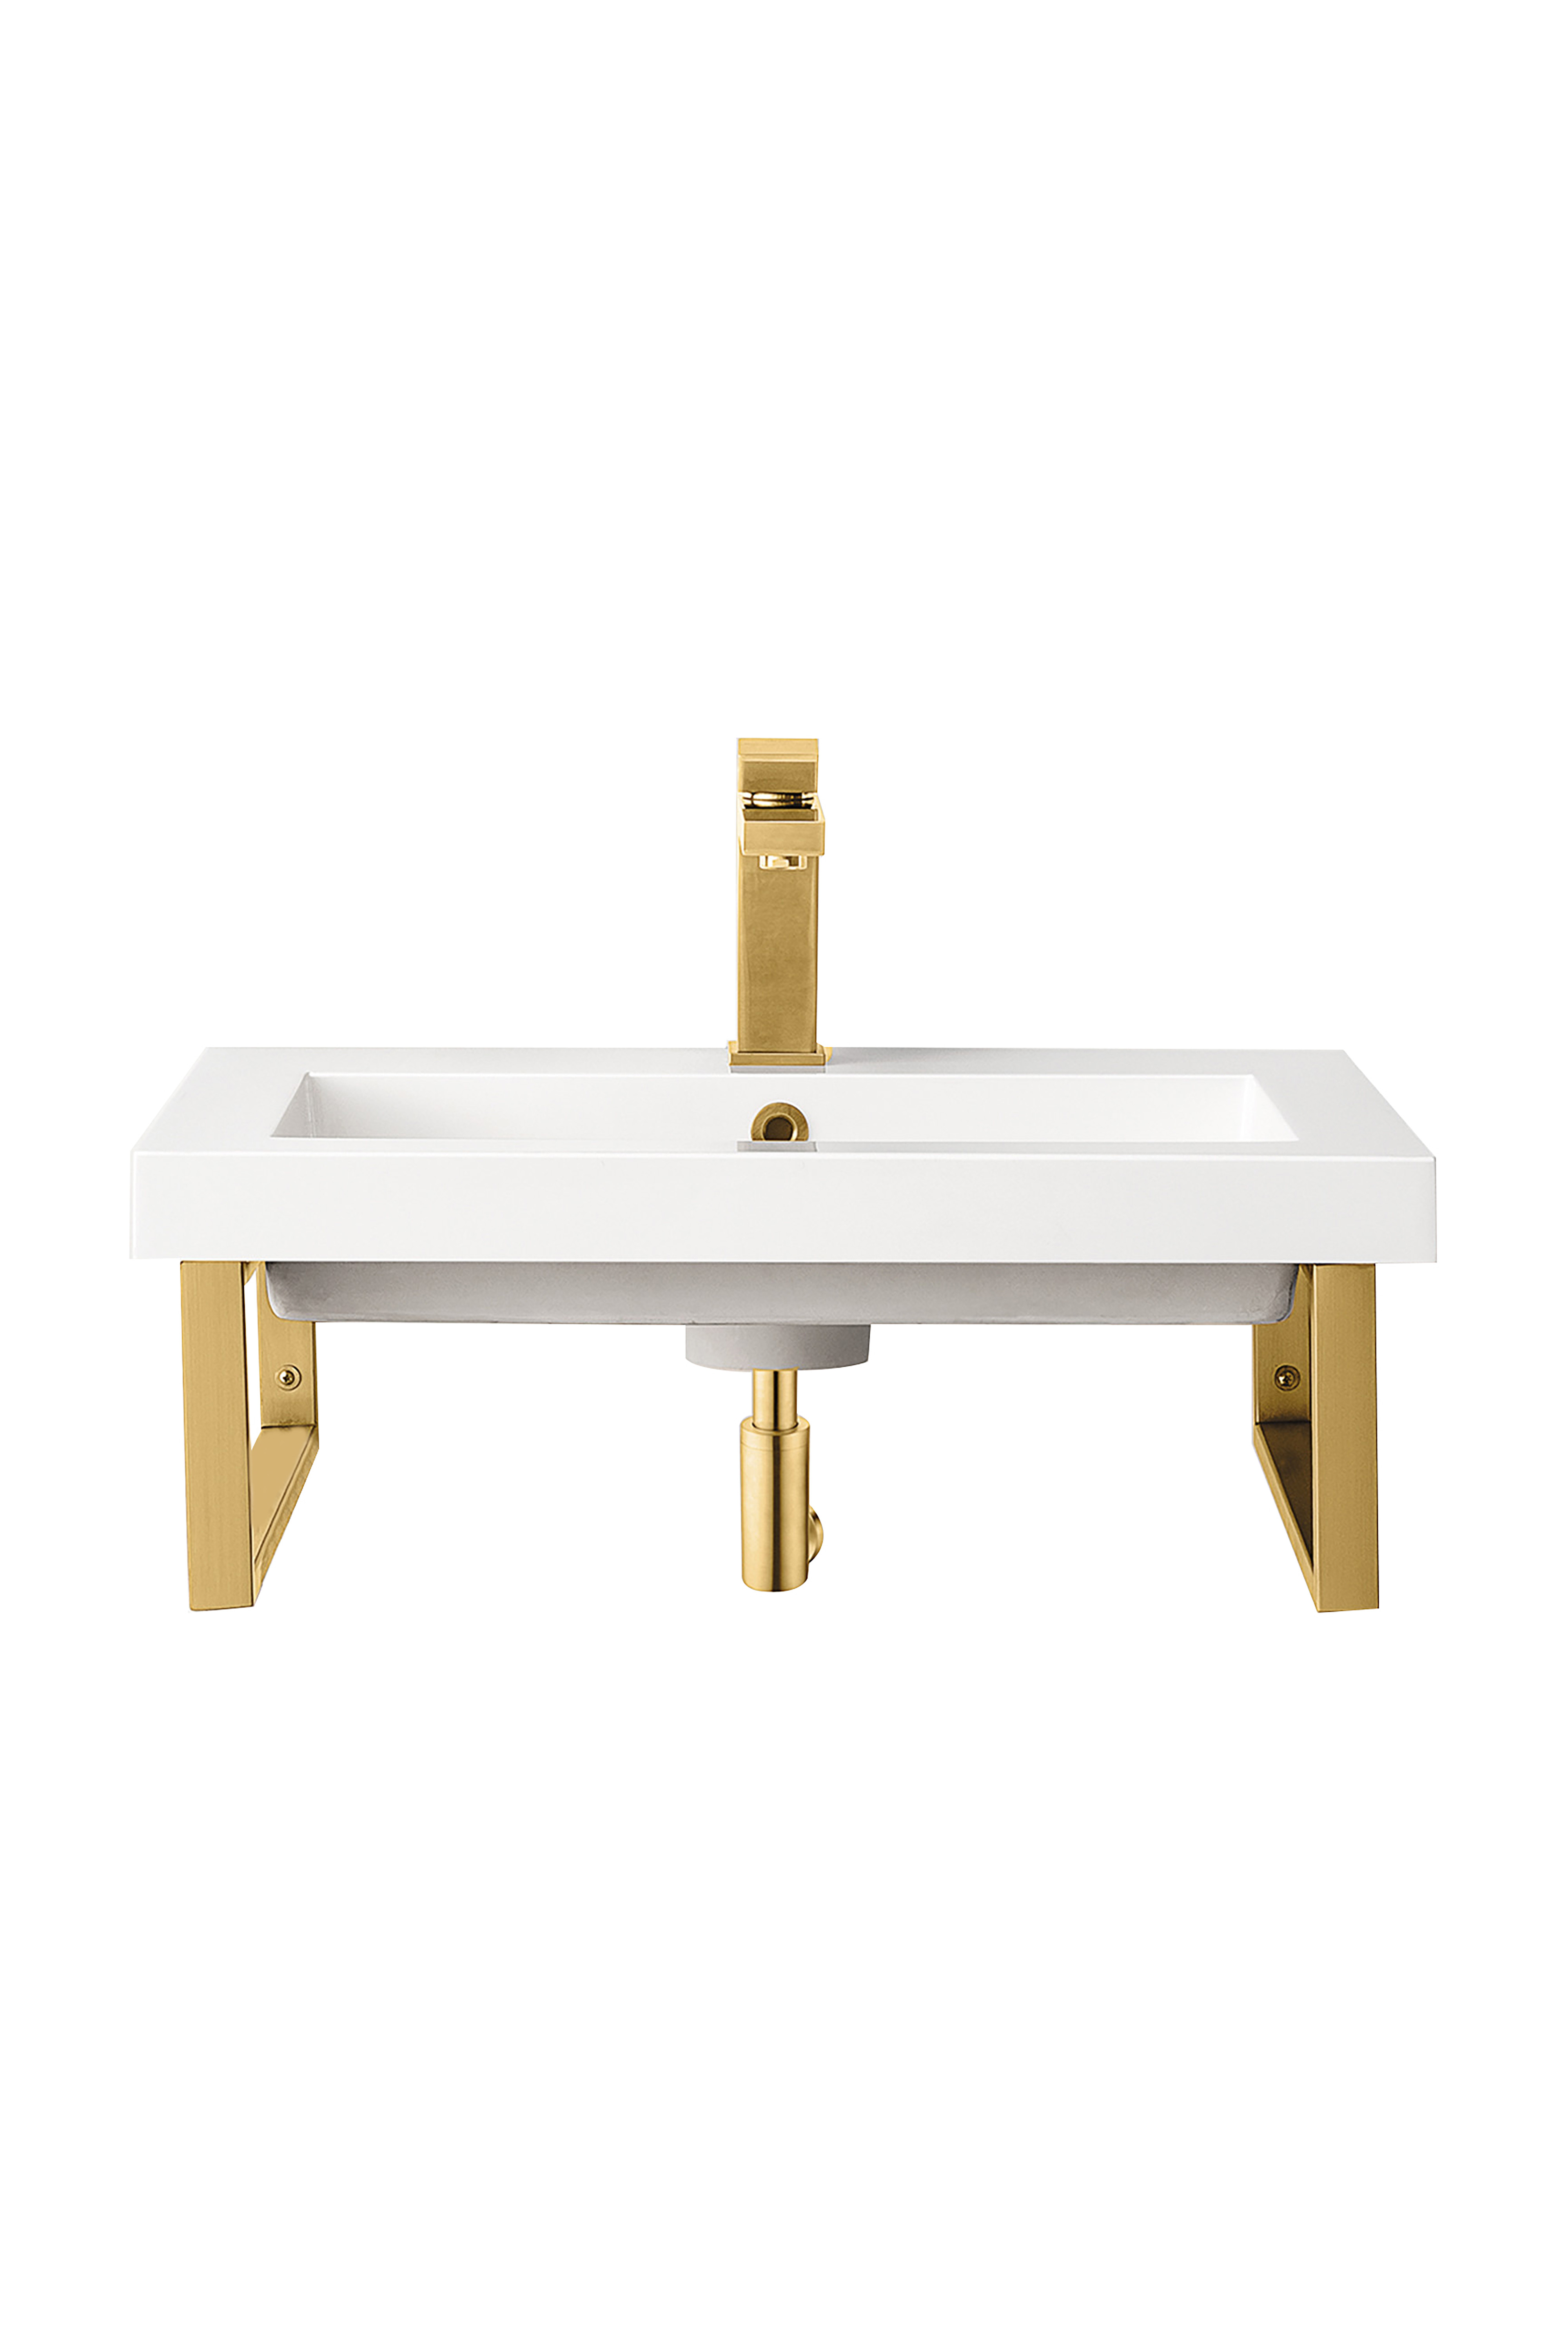 James Martin 055BK18RGD23.6WG2 Two Boston 18" Wall Brackets, Radiant Gold w/23.6" White Glossy Composite Countertop